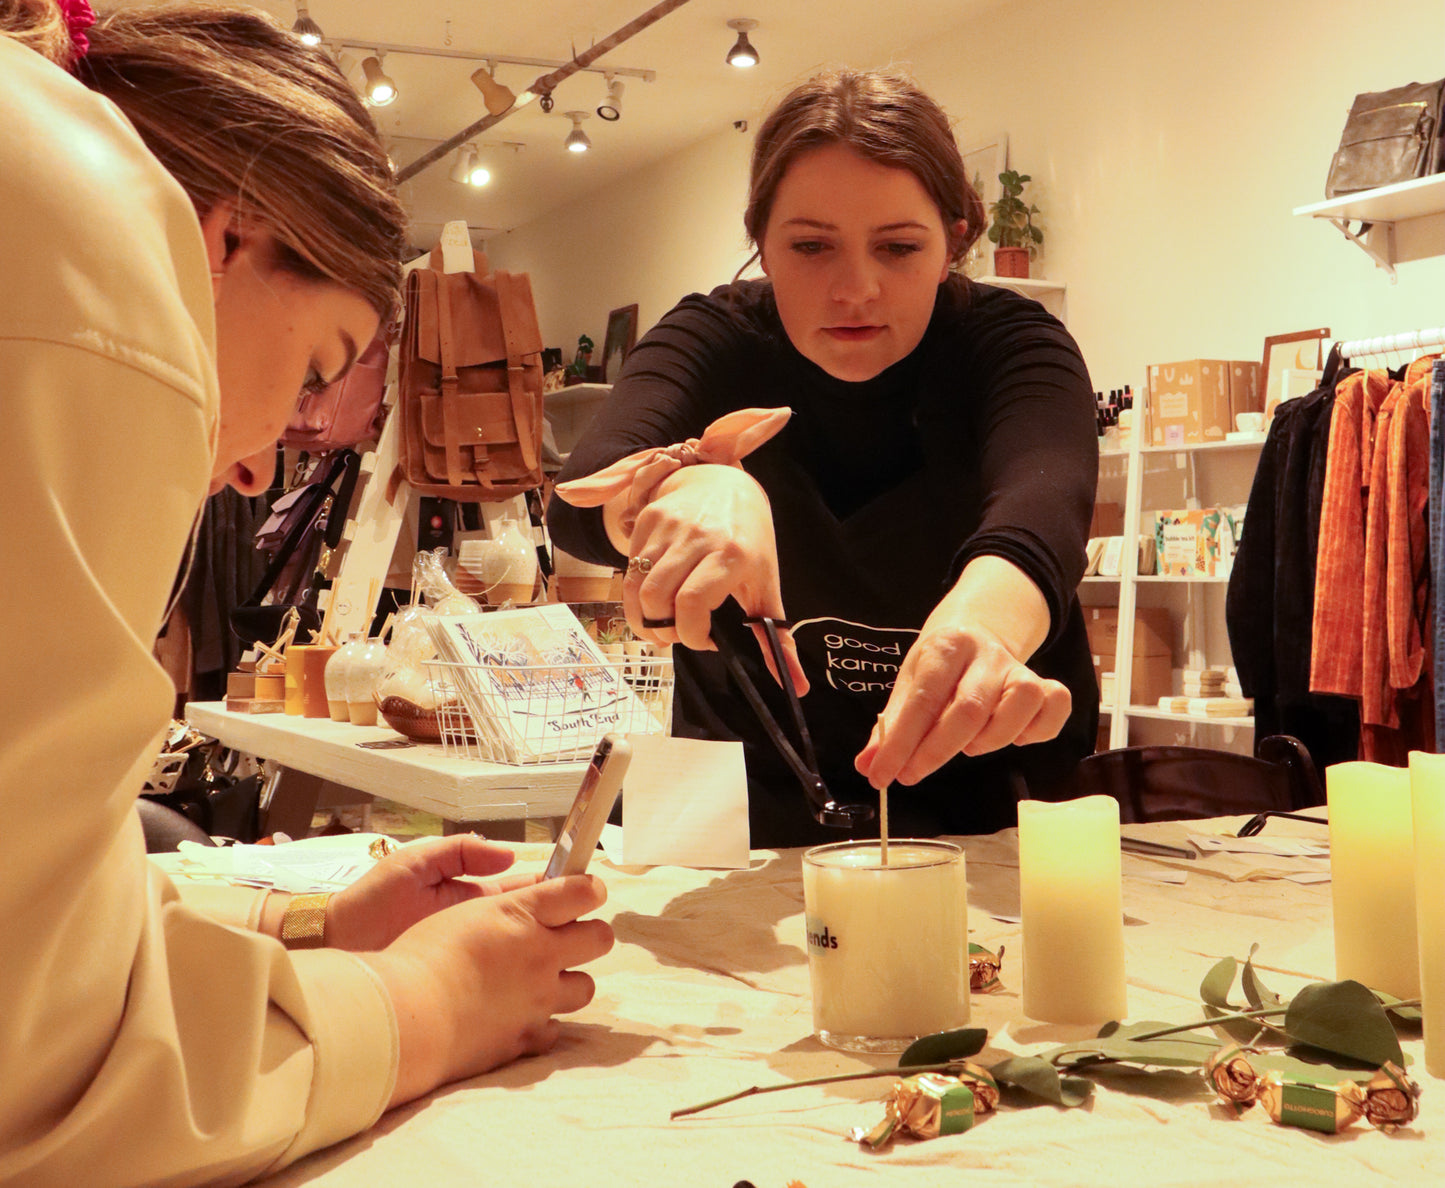 Private Event: Clean Candle Making Workshop with Upcycled Cocktail Glasses - Saturday May 20th at 6pm